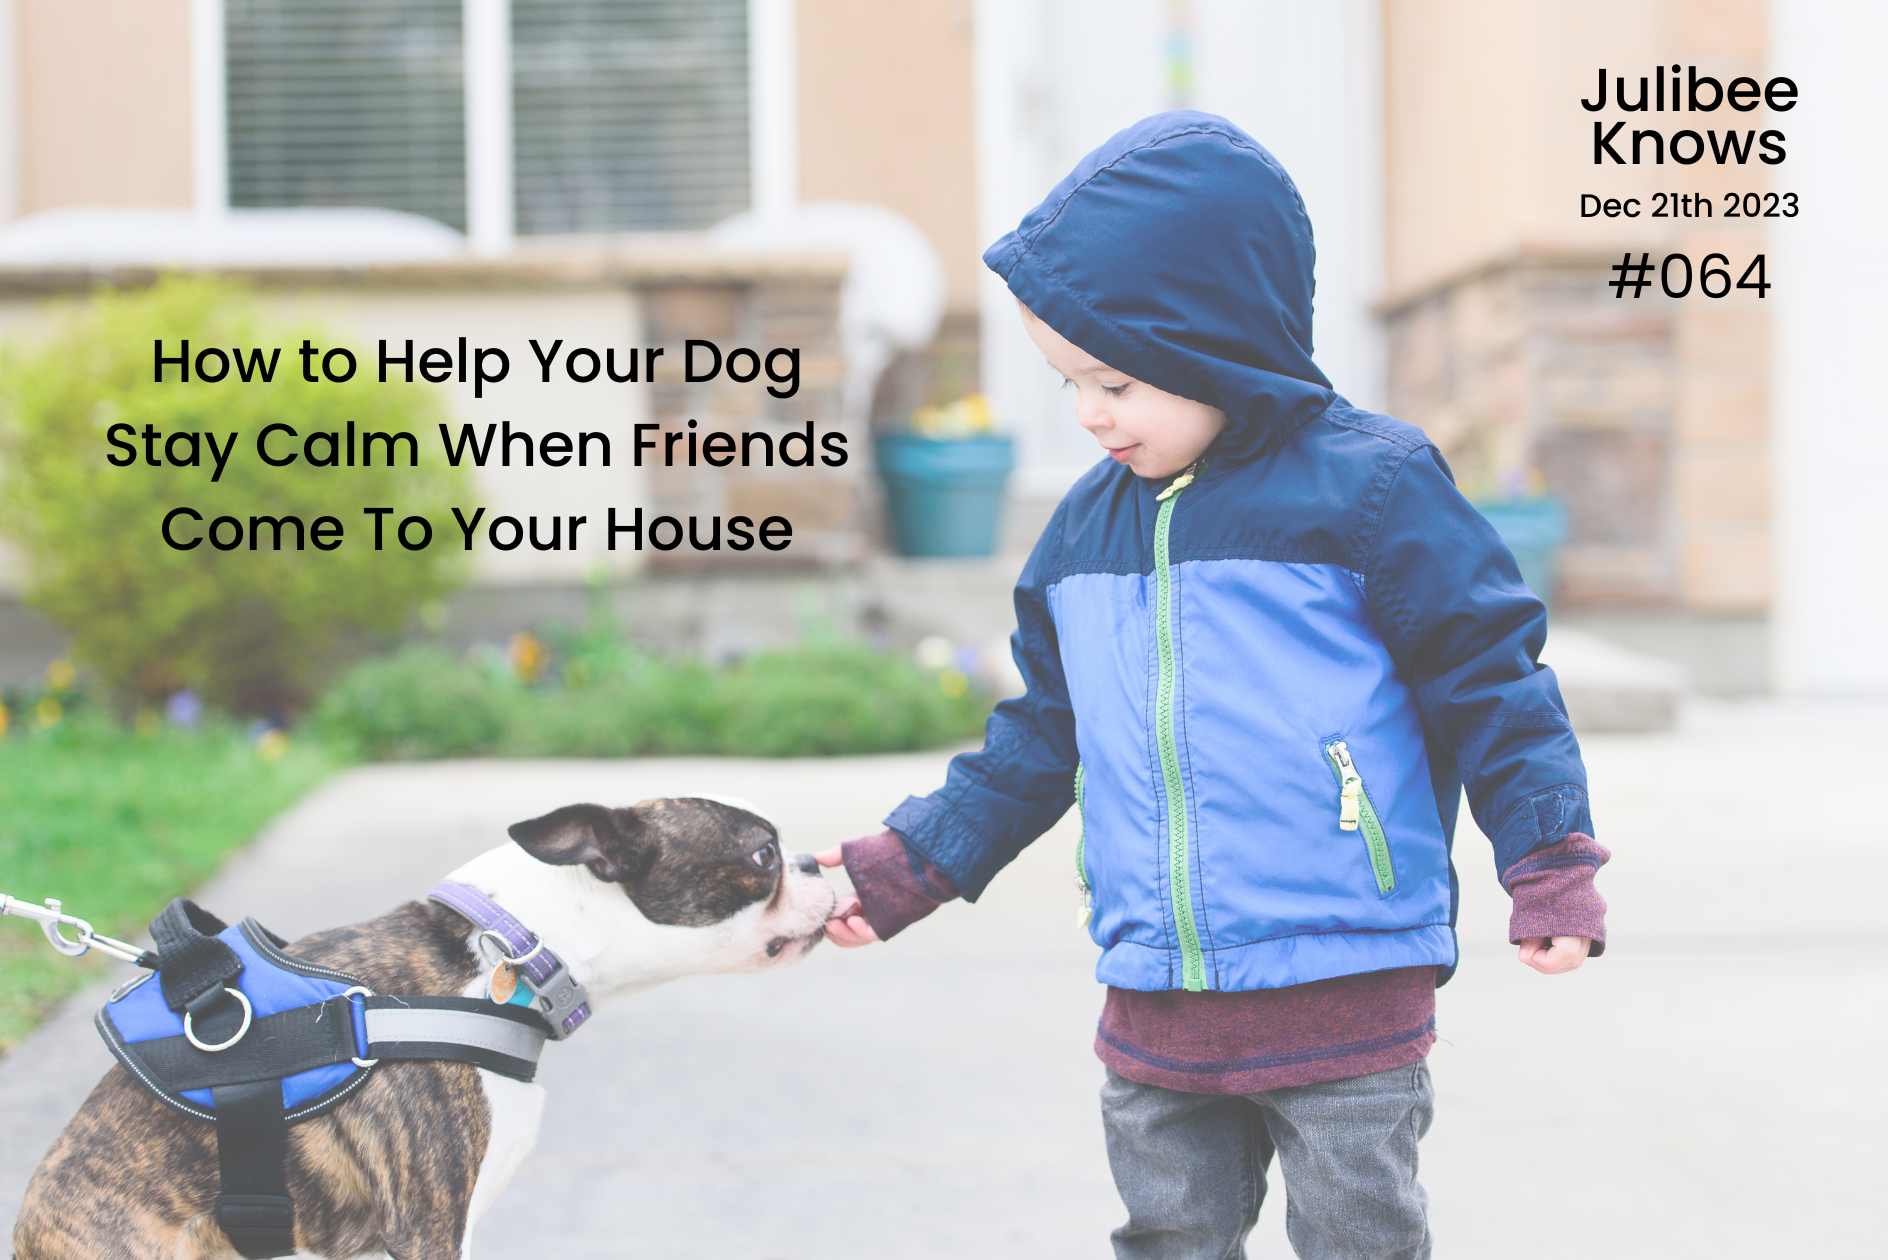 How to Help Your Dog Stay Calm When Friends Come To Your House